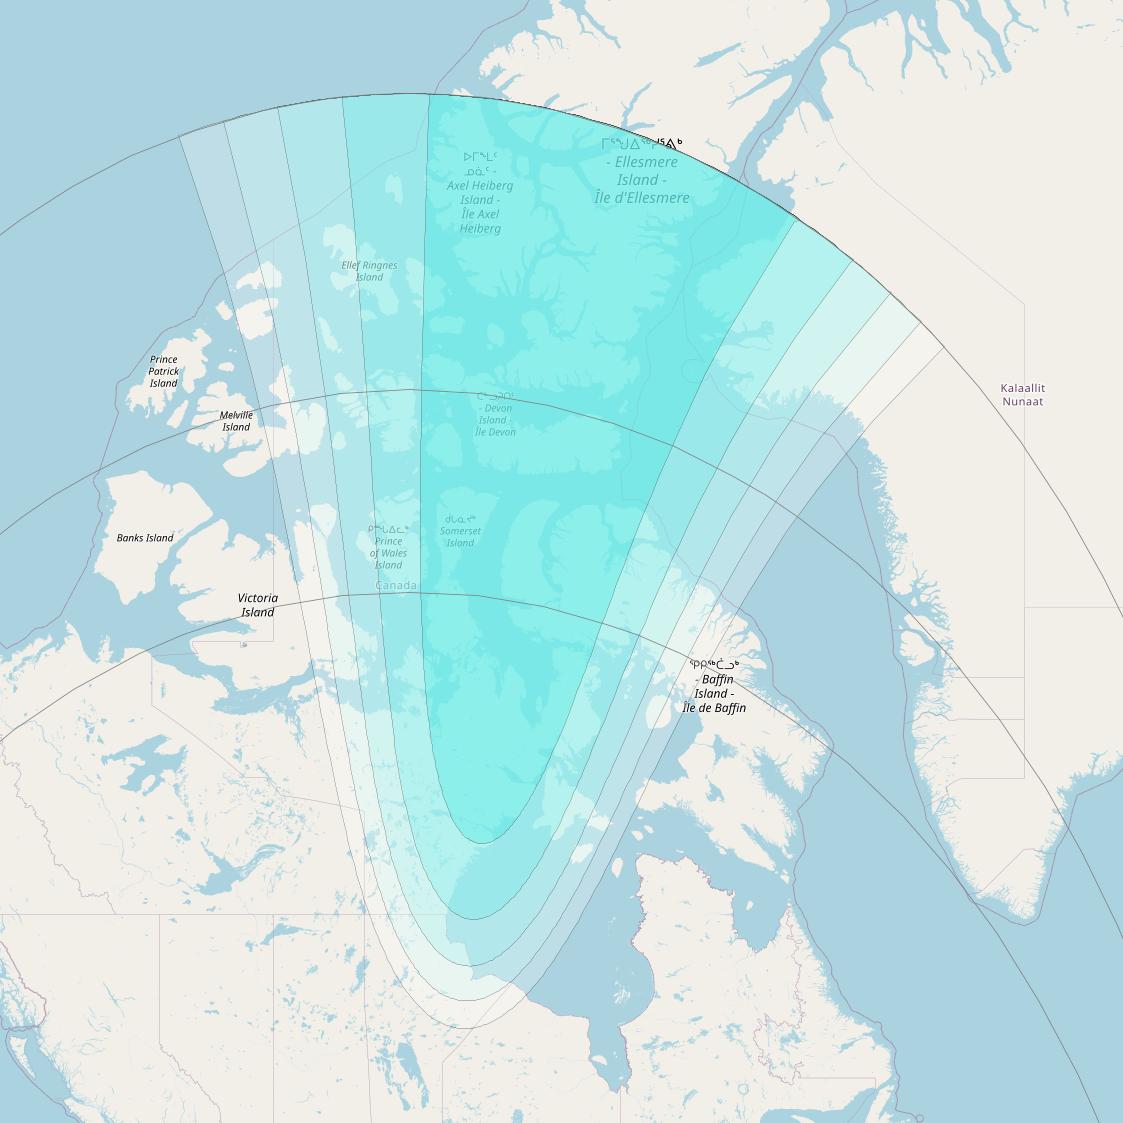 Inmarsat-4F3 at 98° W downlink L-band S111 User Spot beam coverage map